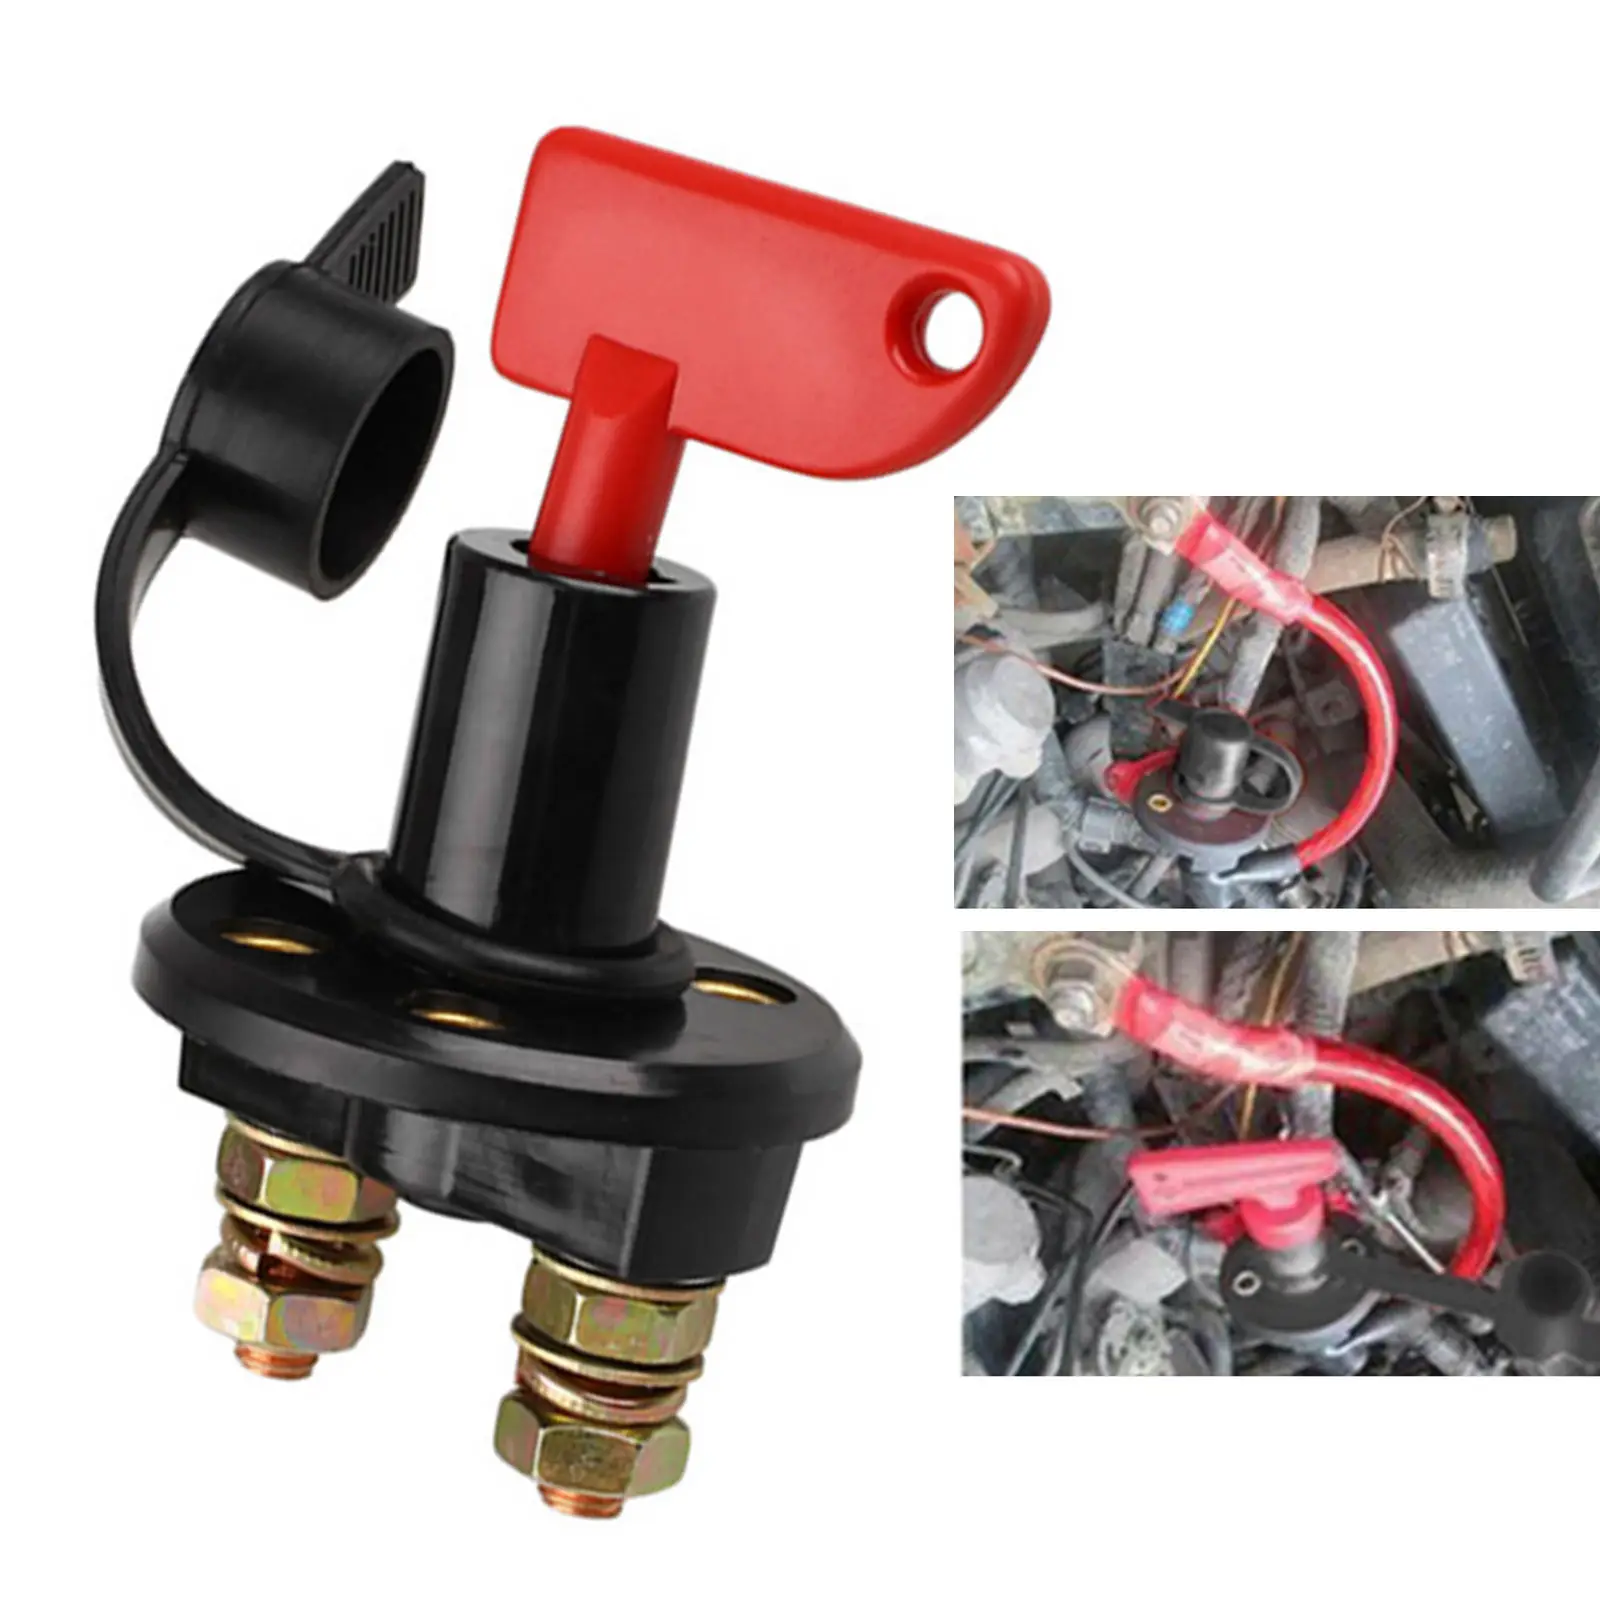 Durable Battery Disconnect Switch, Isolator Cut Off Power Kill Master Battery Switch for Marine Car Boats RV ATV Vehicles